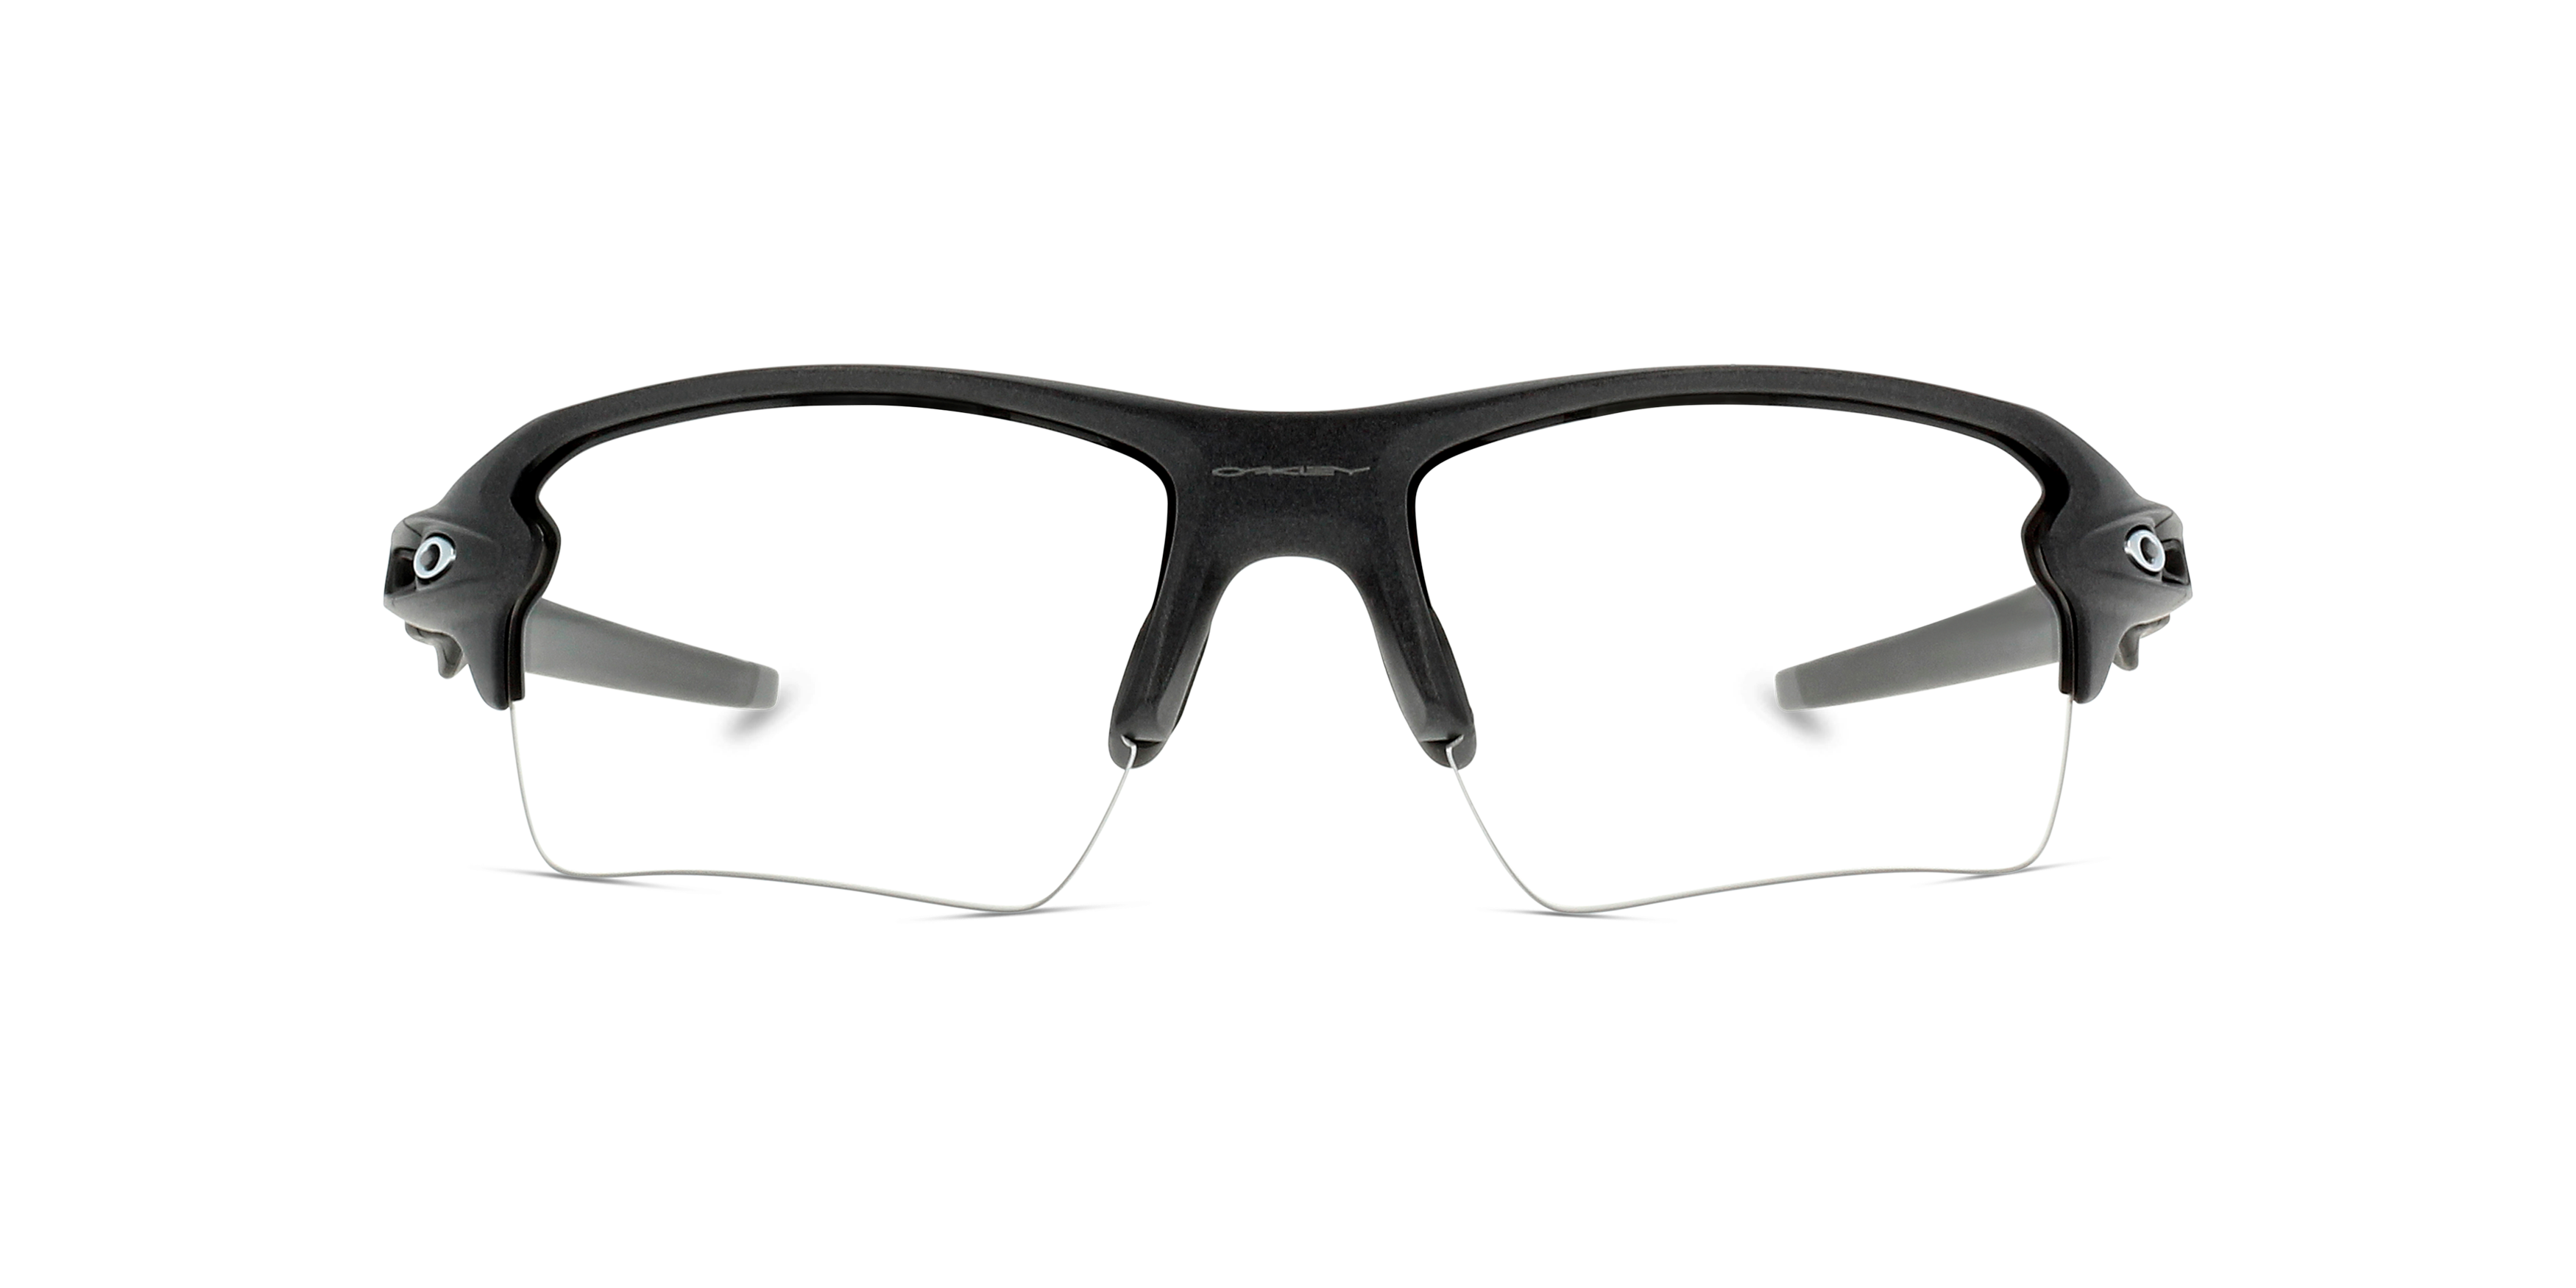 [products.image.front] Oakley Flak 2.0 Xl 0OO9188 918816